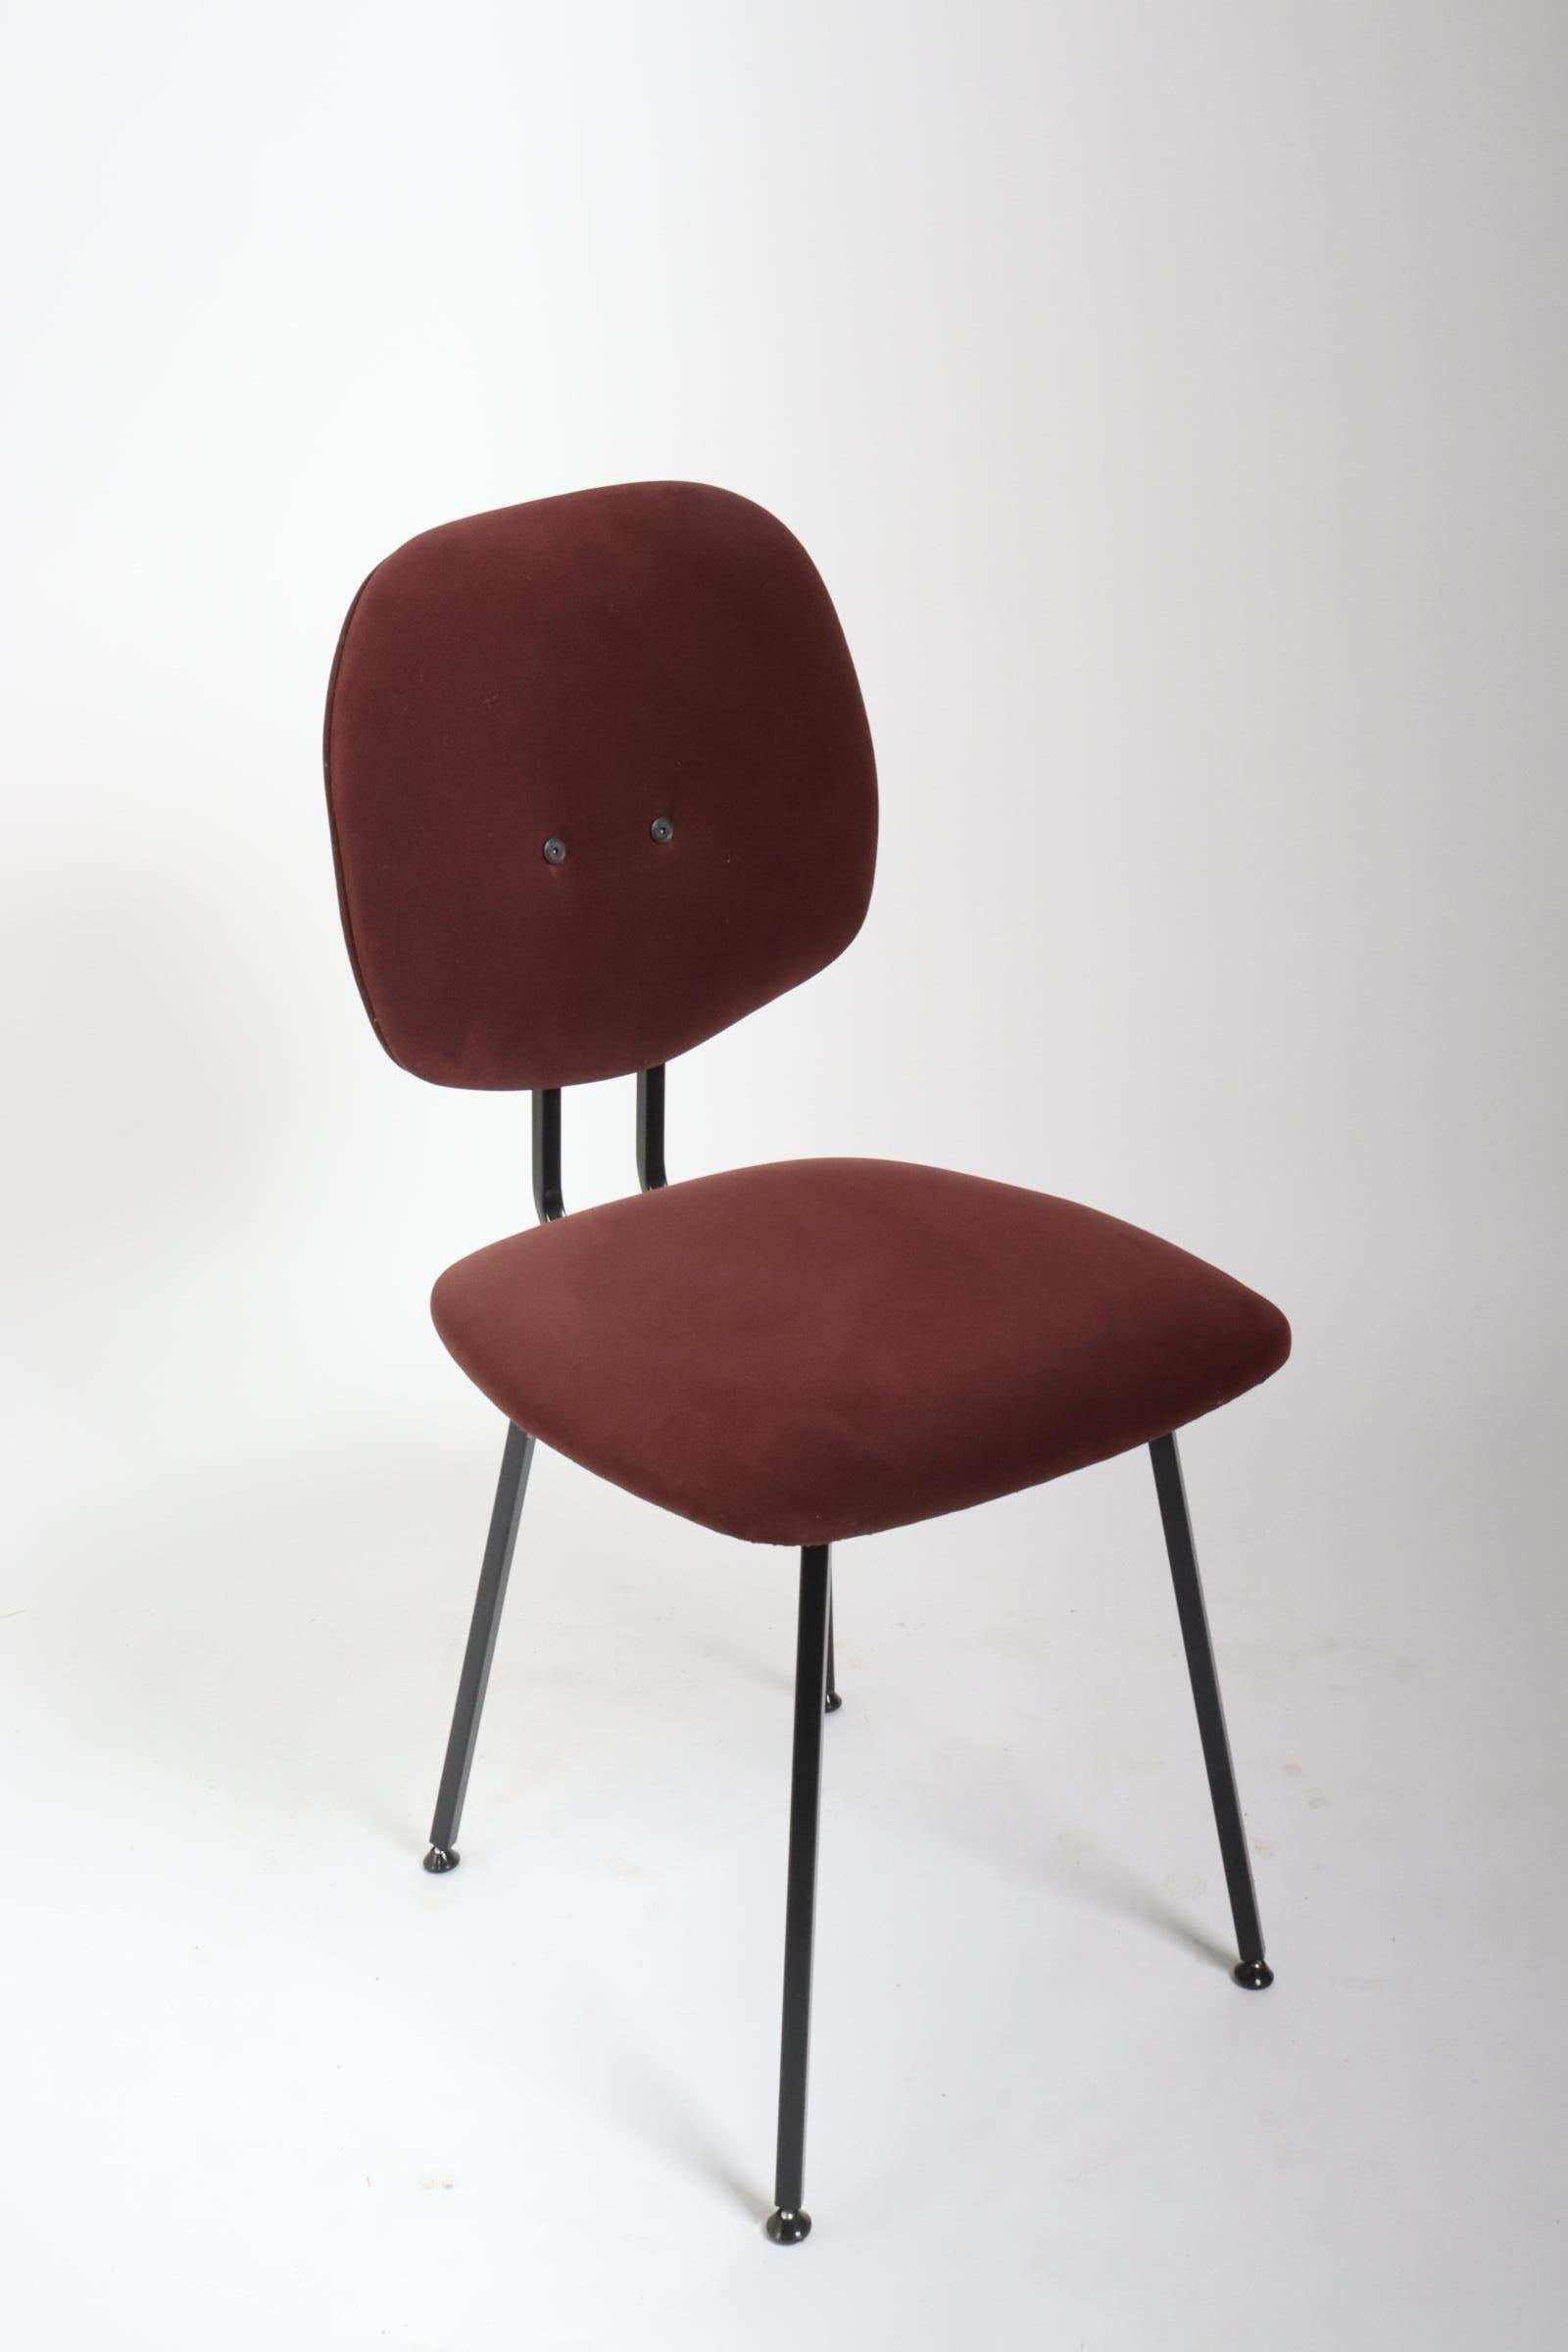 Maarten Baas 101 Chair Upholstered Kvadrat STAR 2 0357
The 101 chair designed by Maarten Baas for Lensvelt. The chairs are available in 8 differently shaped backrests, classified A to H. In the fabric selection menu below, each model can be chosen